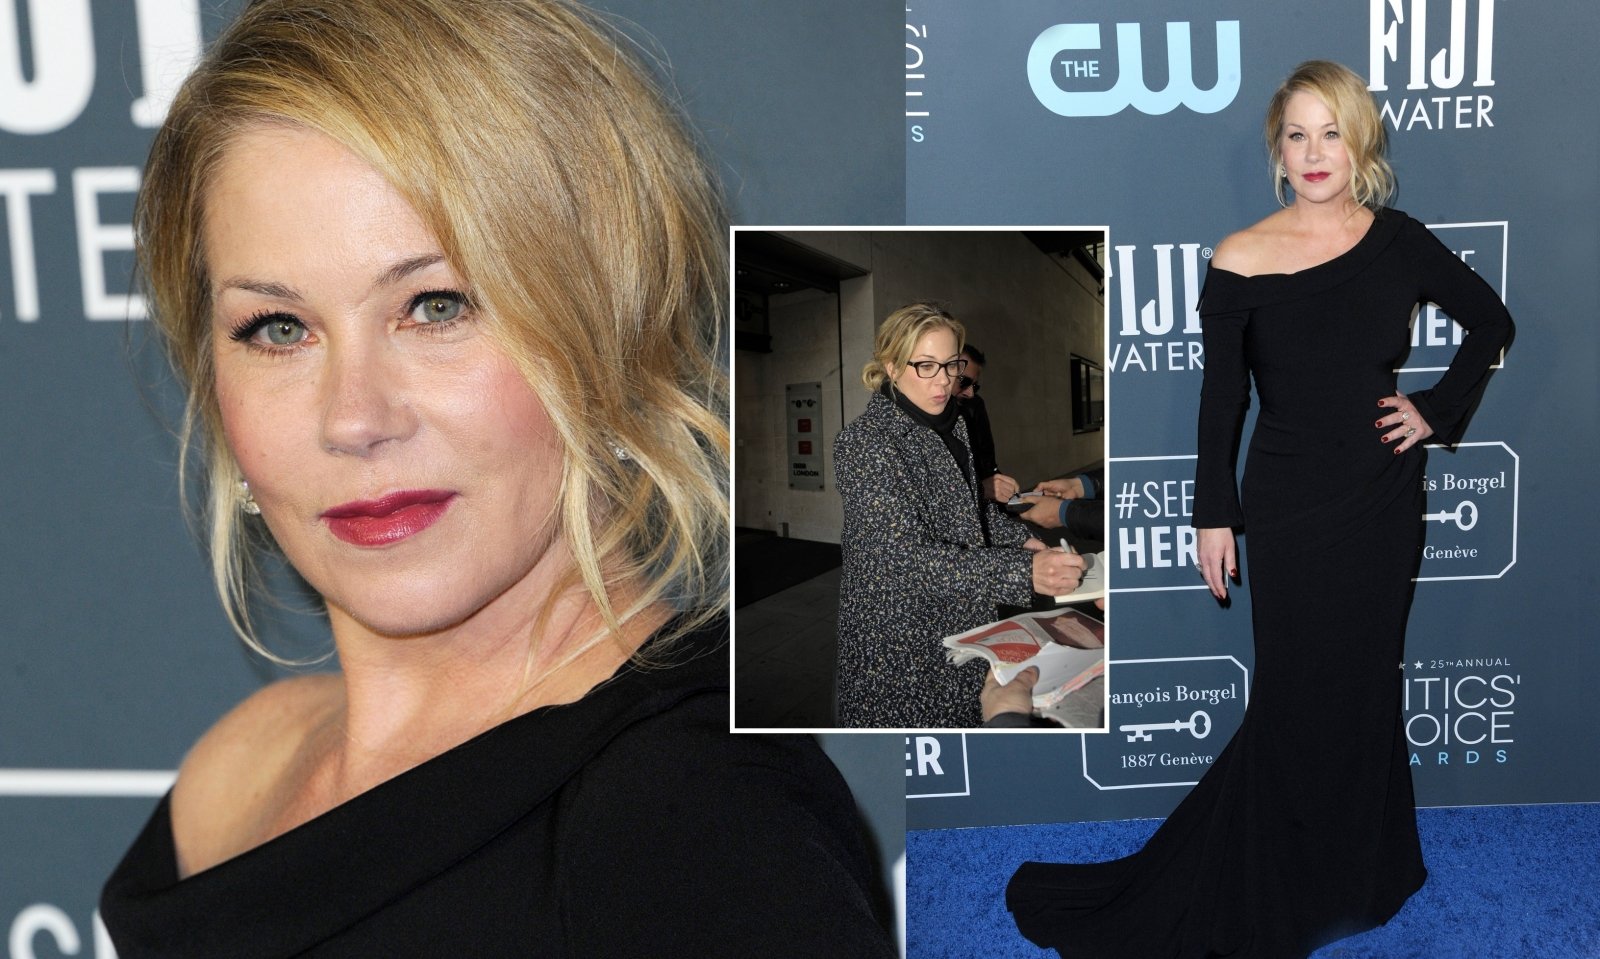 Christina Applegate Gained 18 Kg Due To Her Worsening Condition She